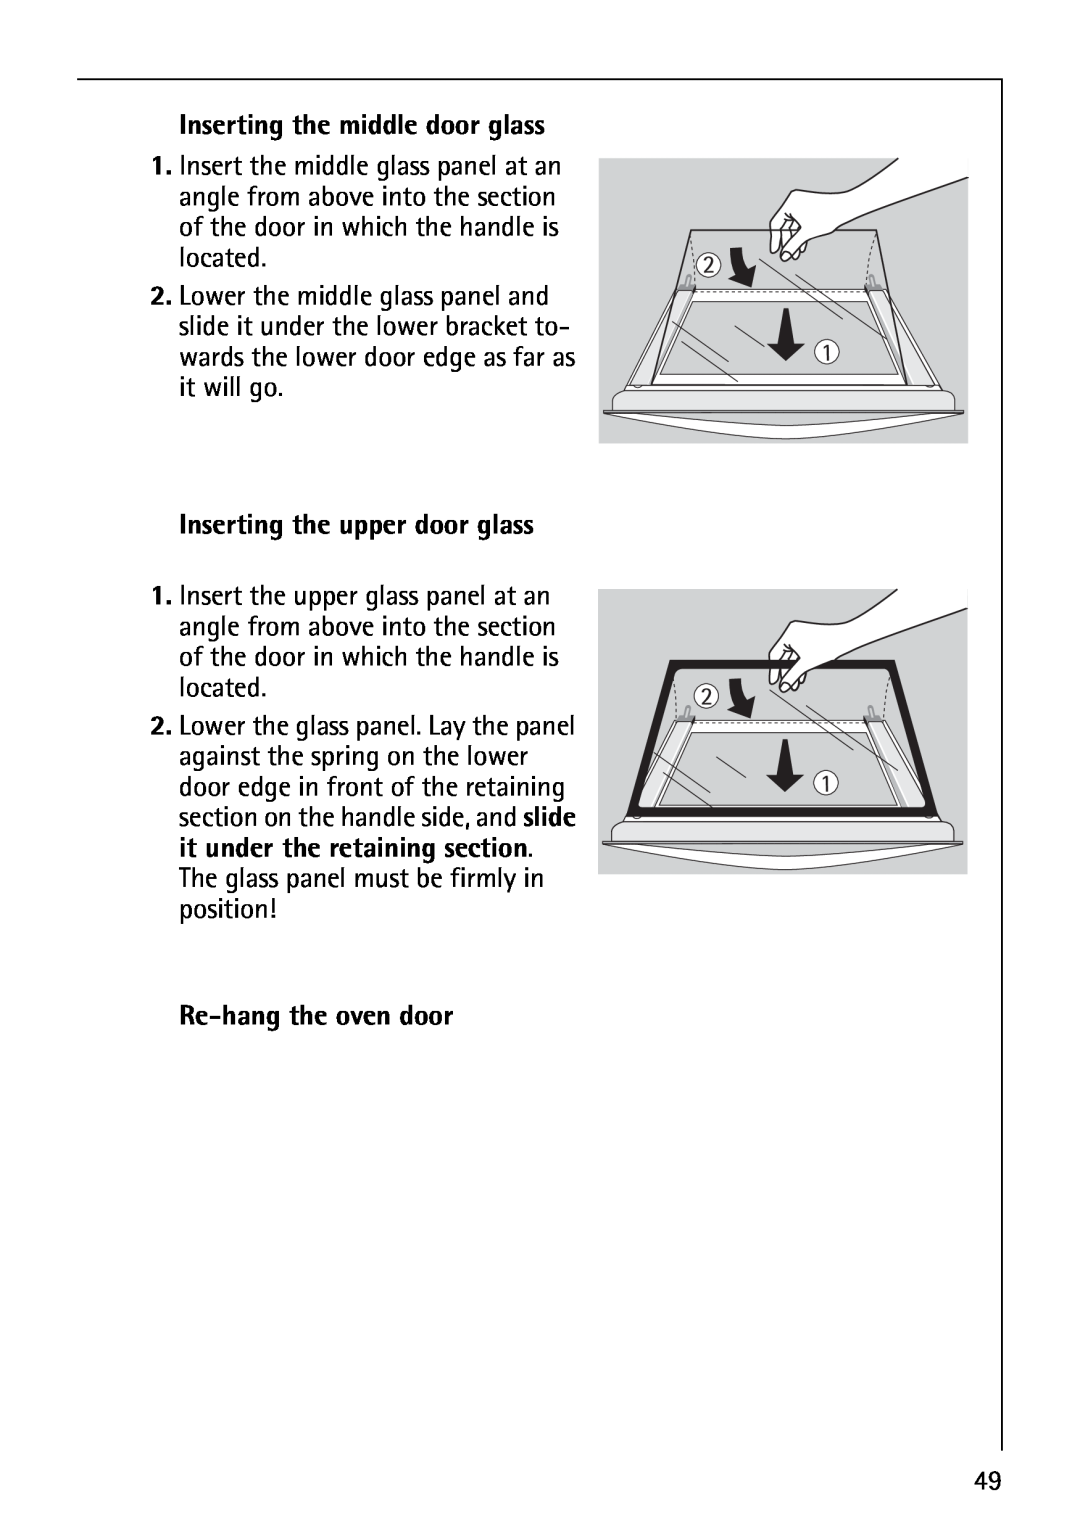 AEG B4130-1 operating instructions Inserting the middle door glass, Inserting the upper door glass, Re-hangthe oven door 